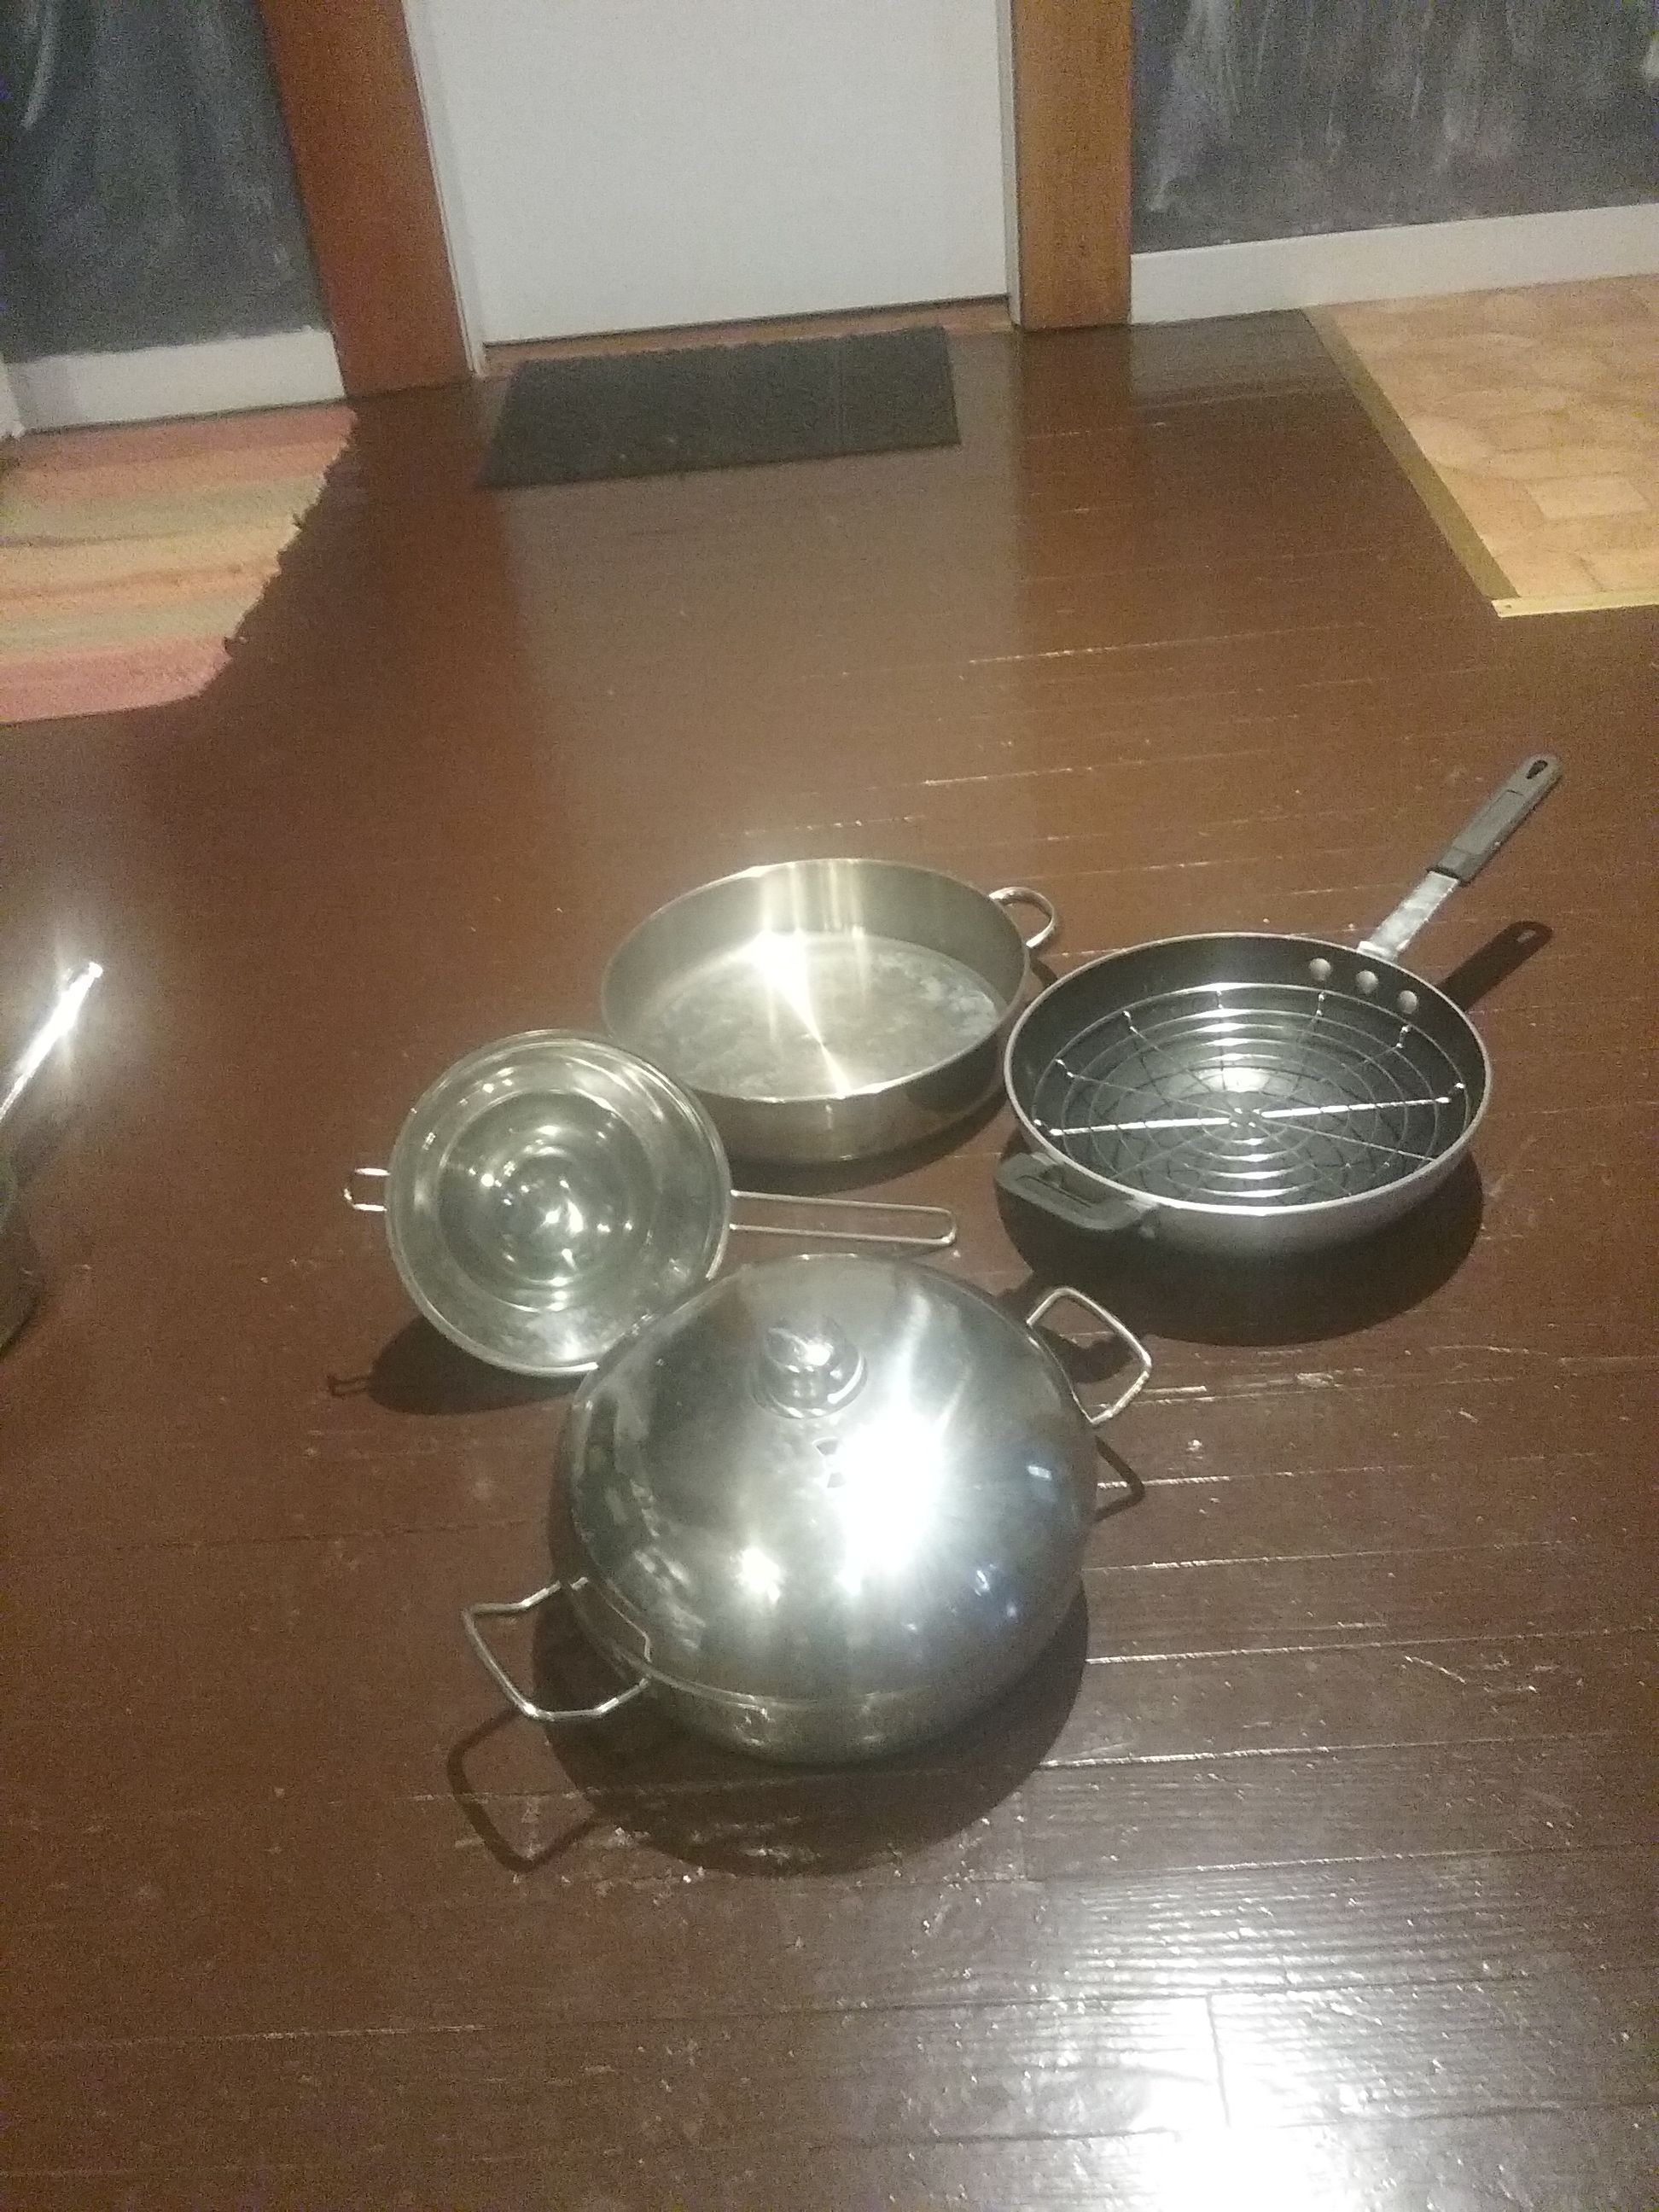 Misc. Cookware including wok and double boiler.